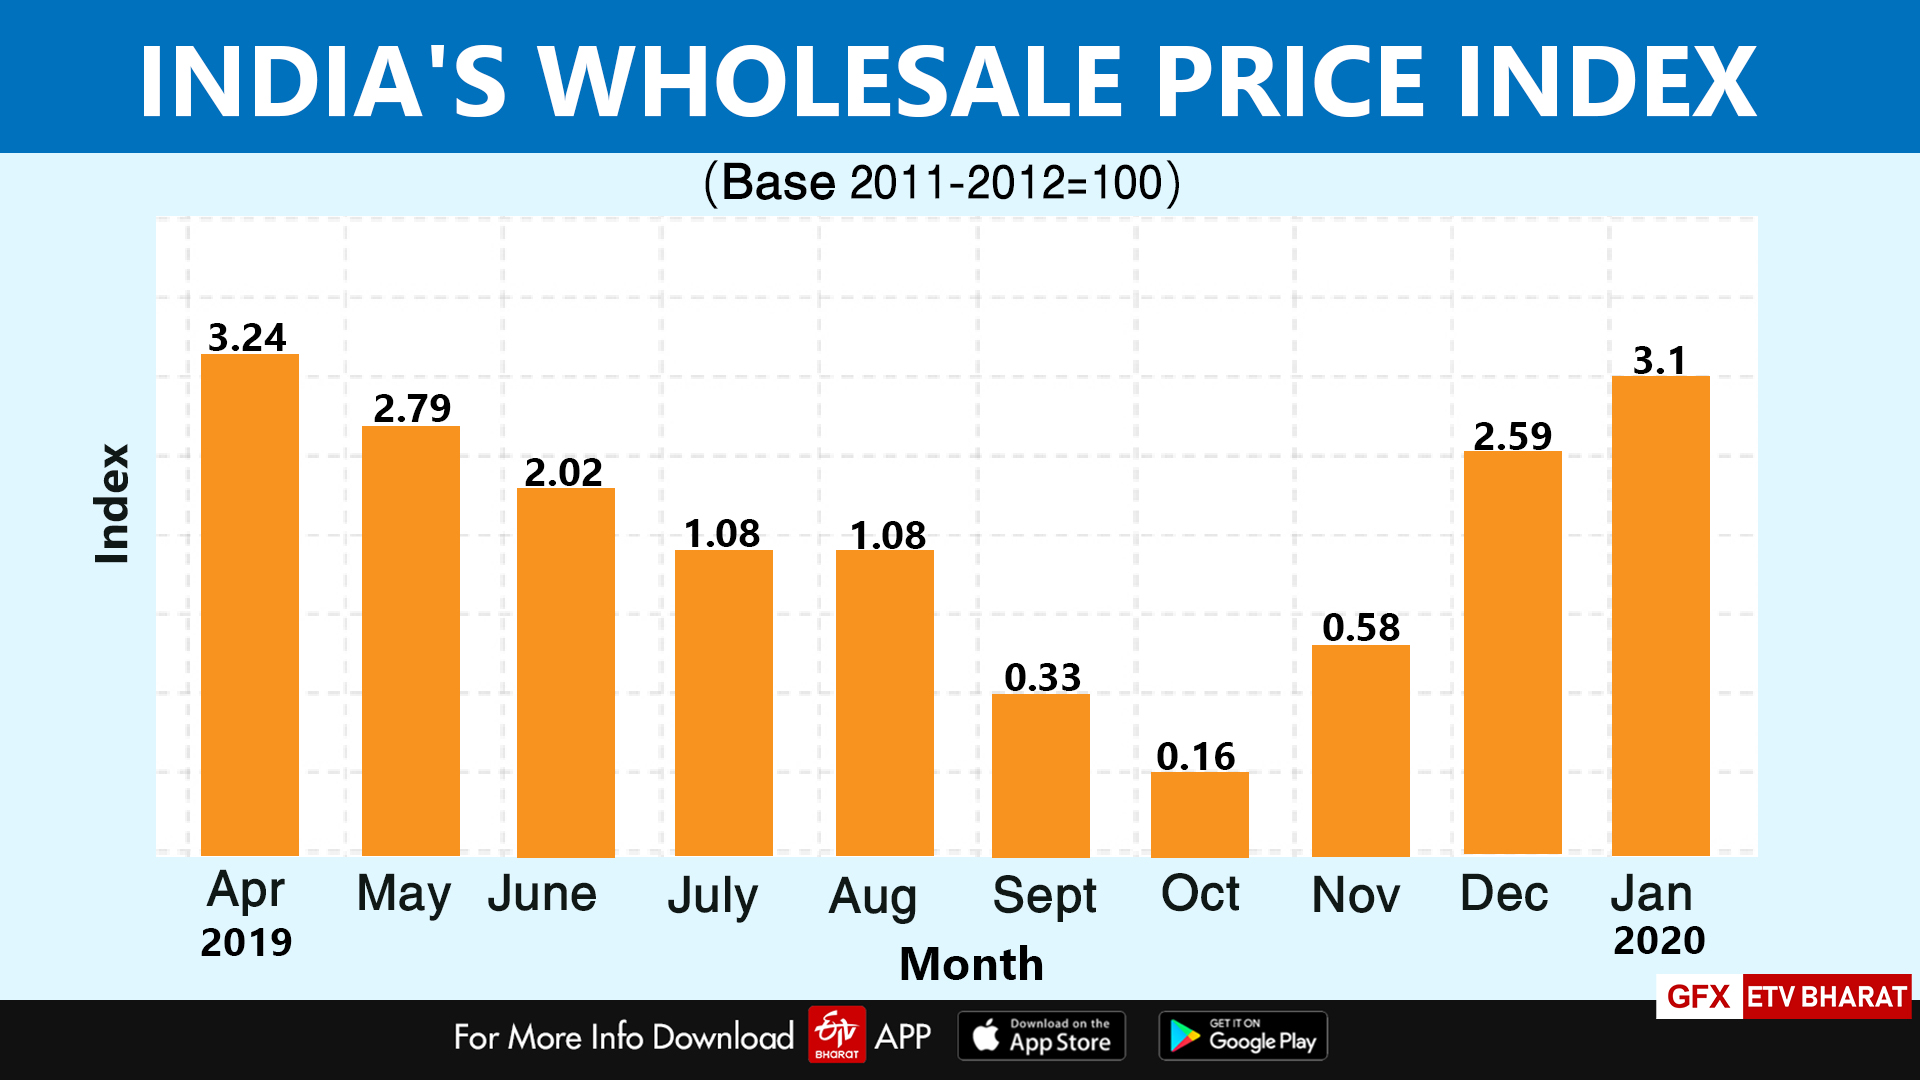 Wholesale inflation stood at 3.1% in January